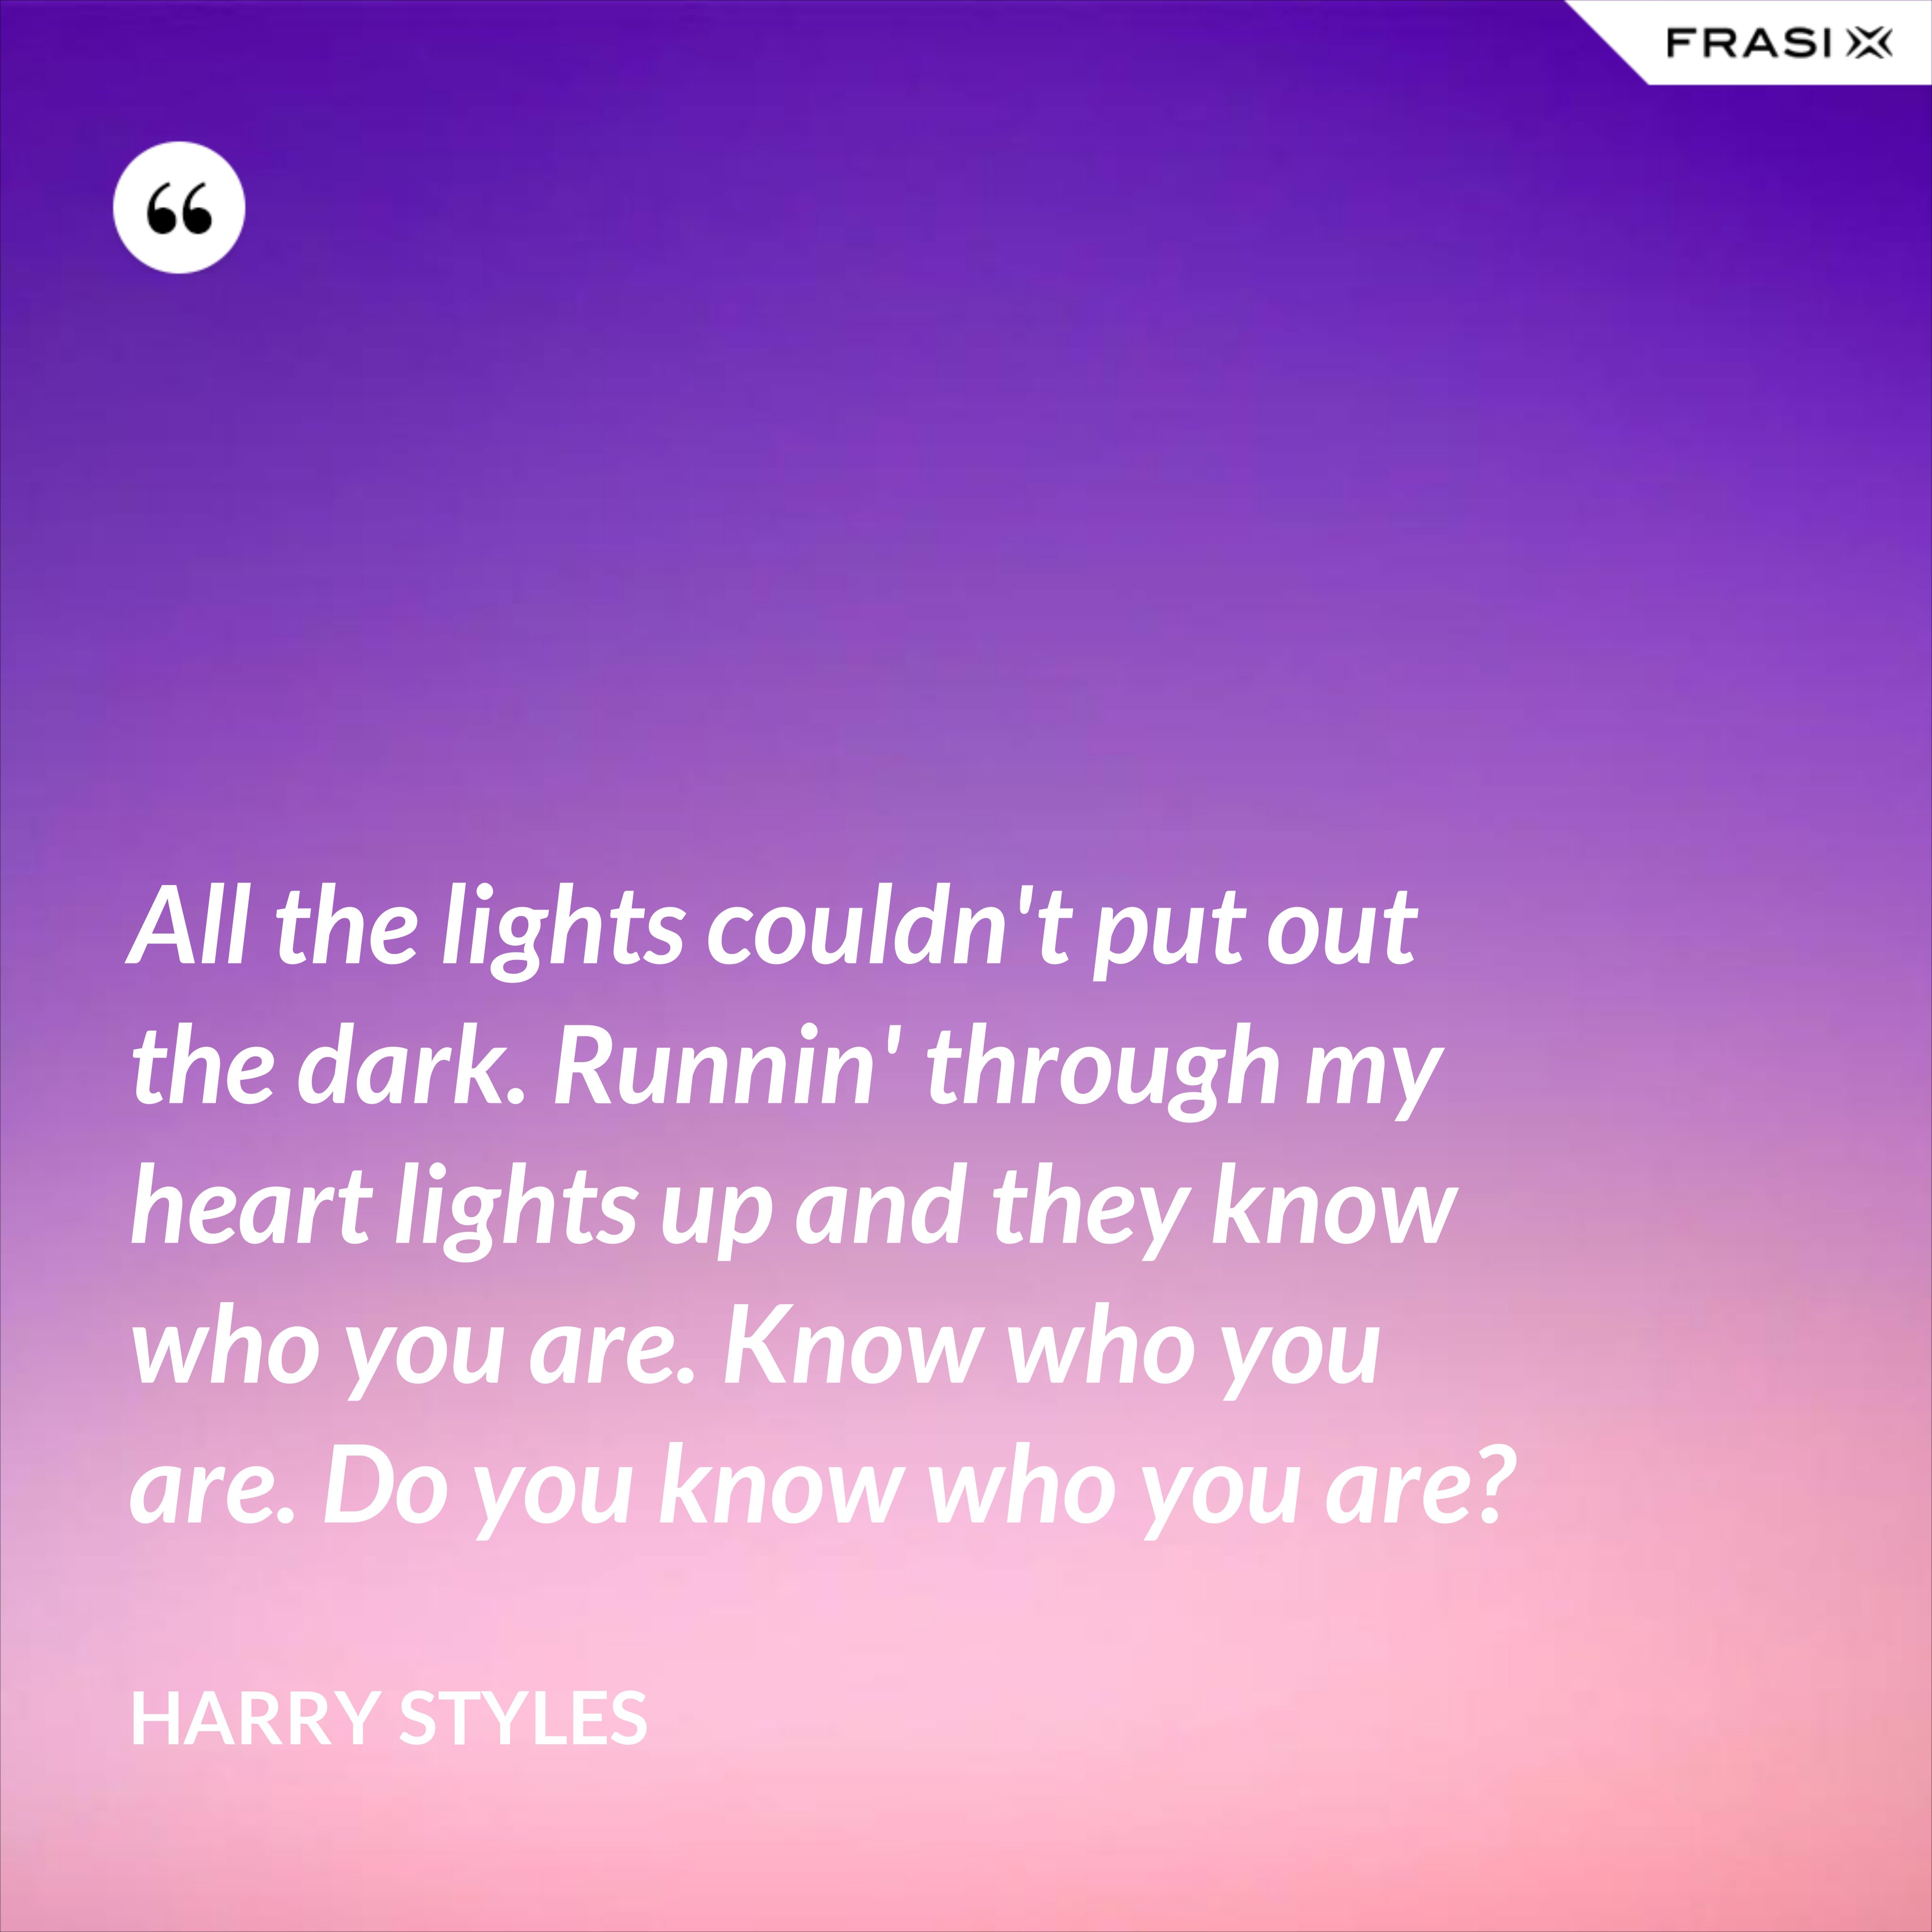 All the lights couldn't put out the dark. Runnin' through my heart lights up and they know who you are. Know who you are. Do you know who you are? - Harry Styles